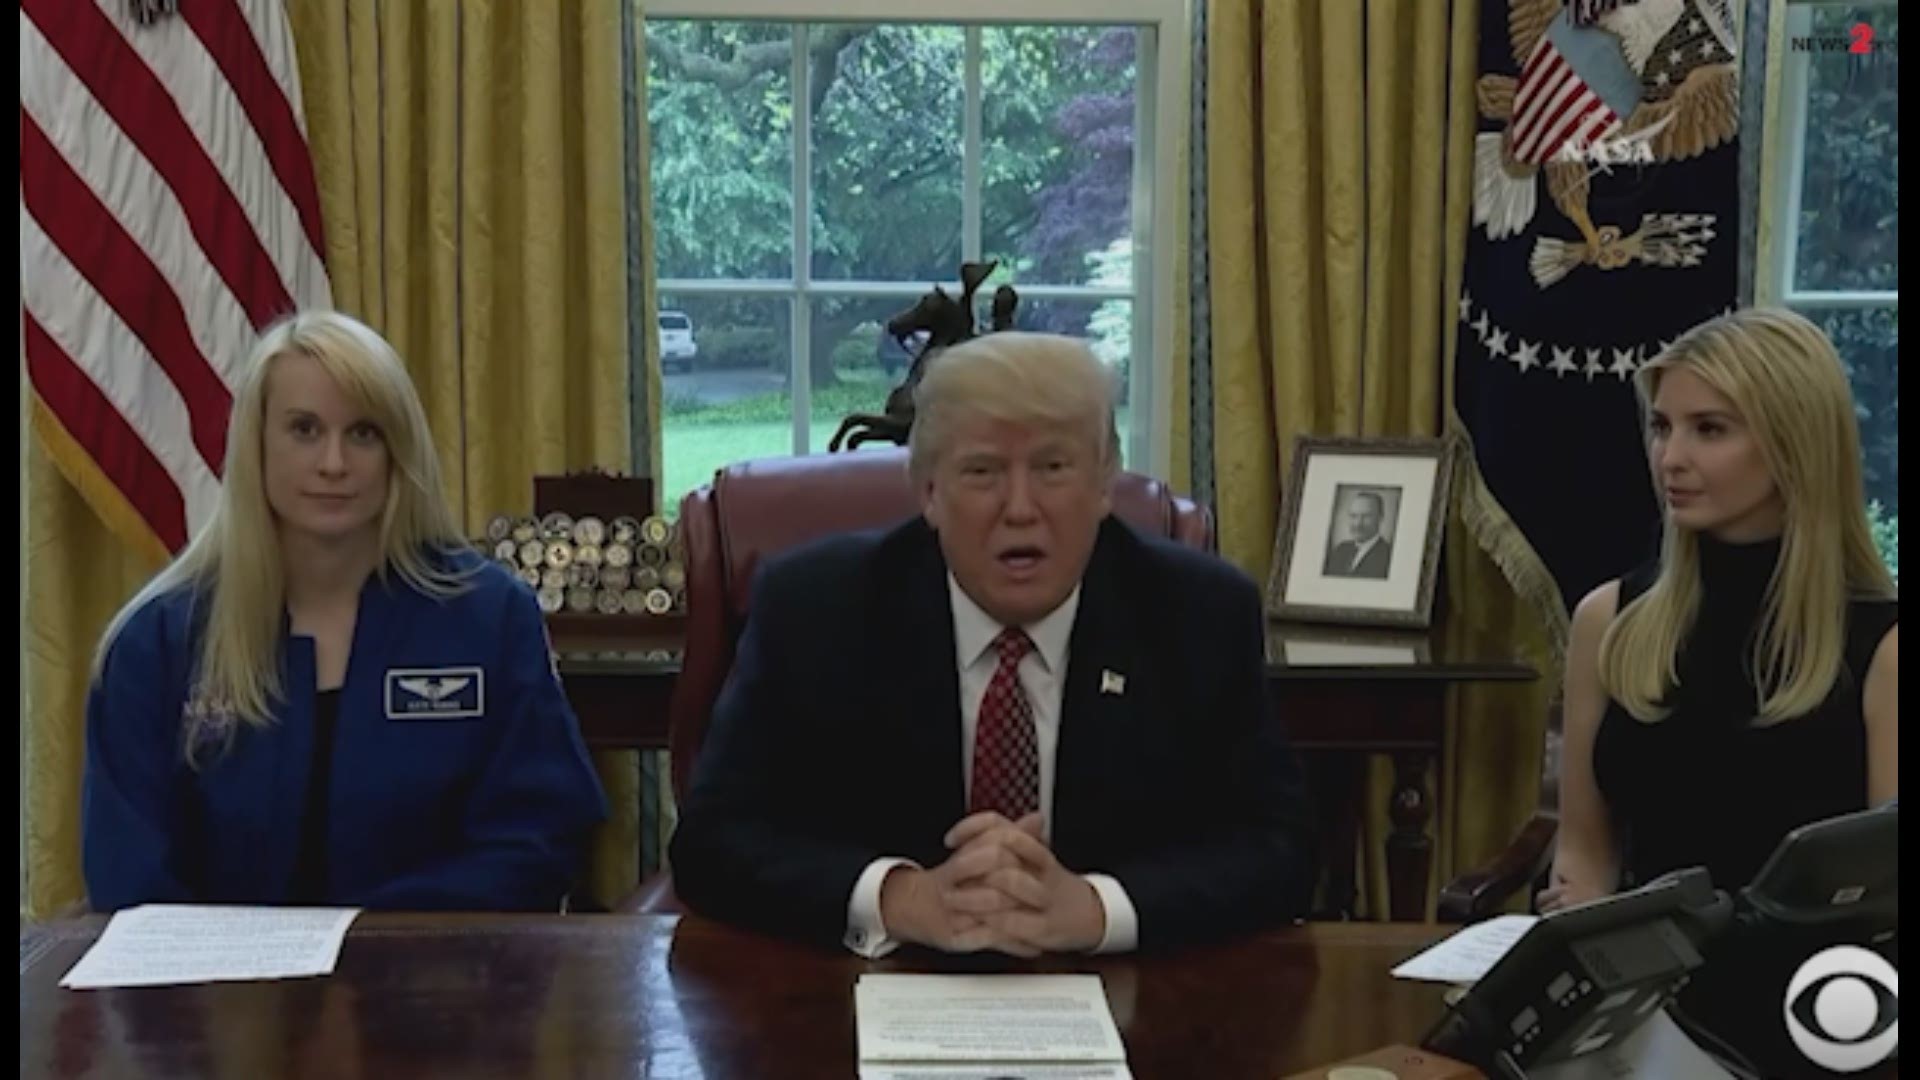 NASA astronaut Peggy Whitson set a space record early Monday and President Trump called to congratulate her.  Astronaut Kate Rubins and daughter Ivanka Trump were there for the call.